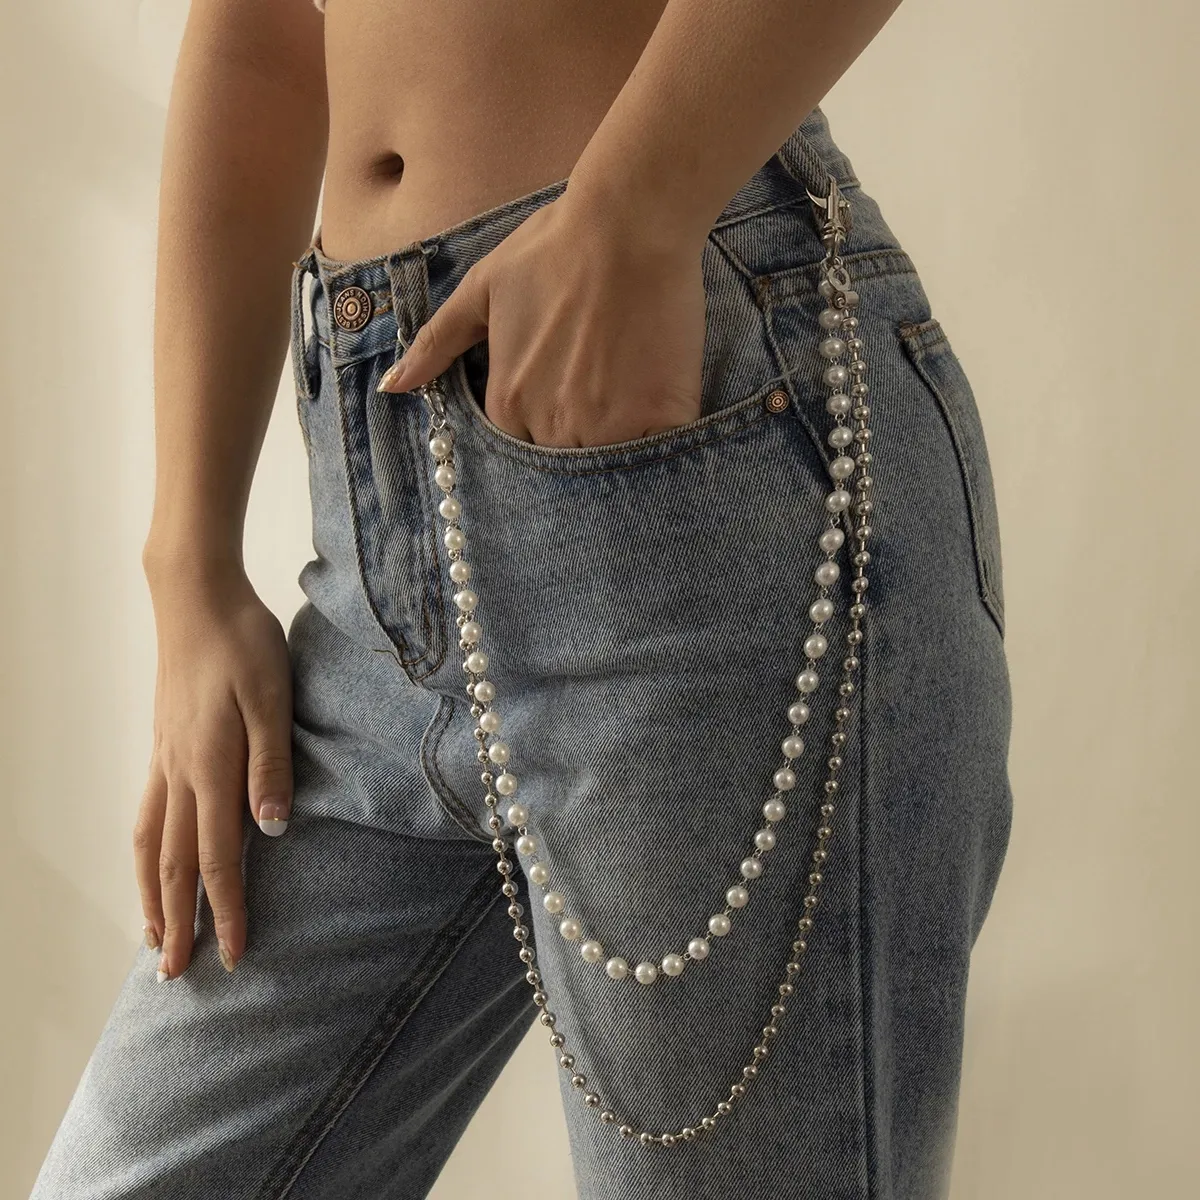 Punk Trendy Metal Beads Jeans Pants Waist Belt Chain Fashion Multi-layer Pearl Trouser Chain Clothing Accessories Body Jewelry